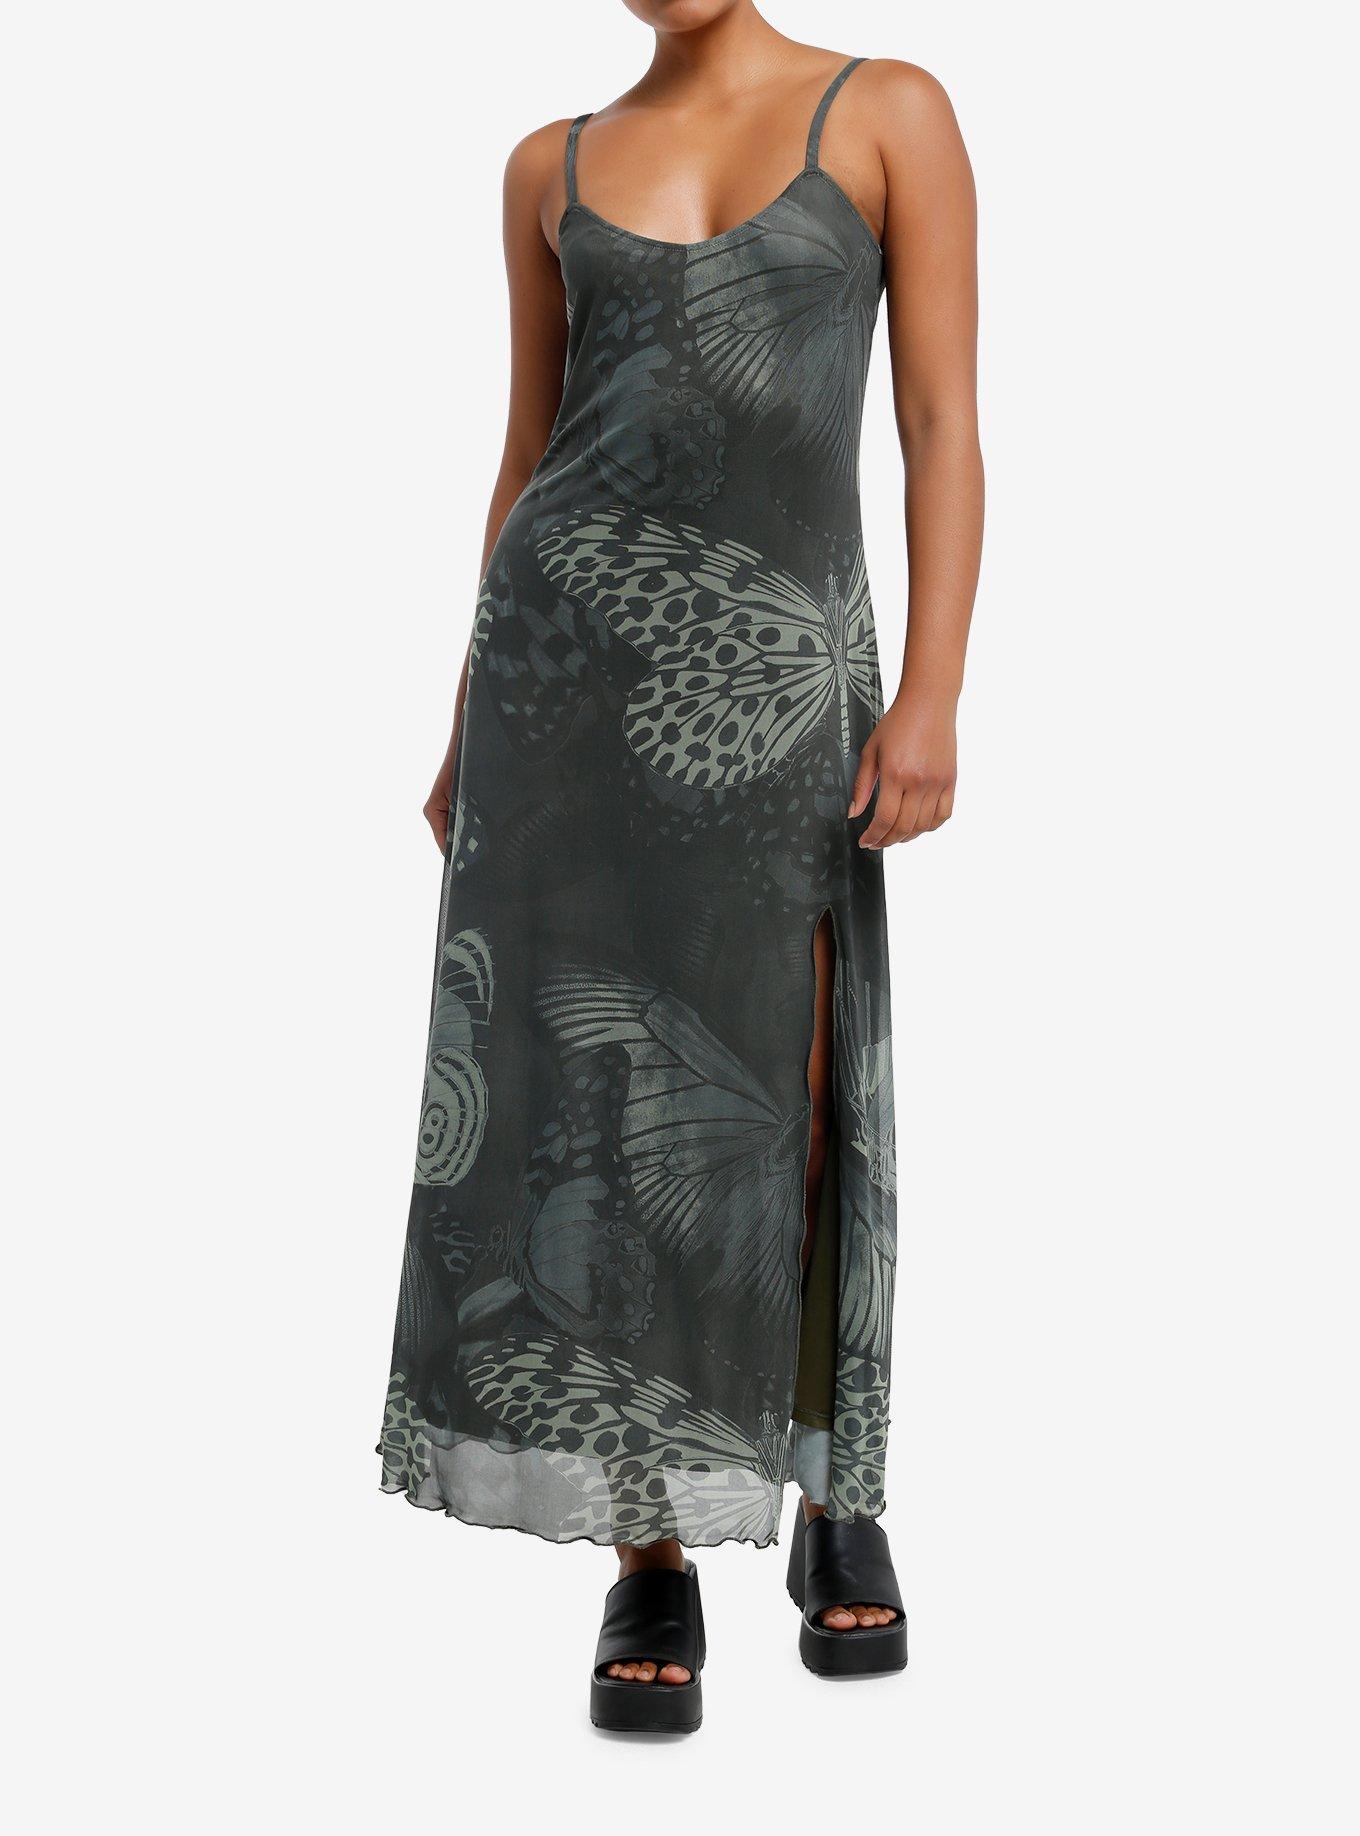 Thorn & Fable Green Butterfly Slit Maxi Dress, GREEN, hi-res